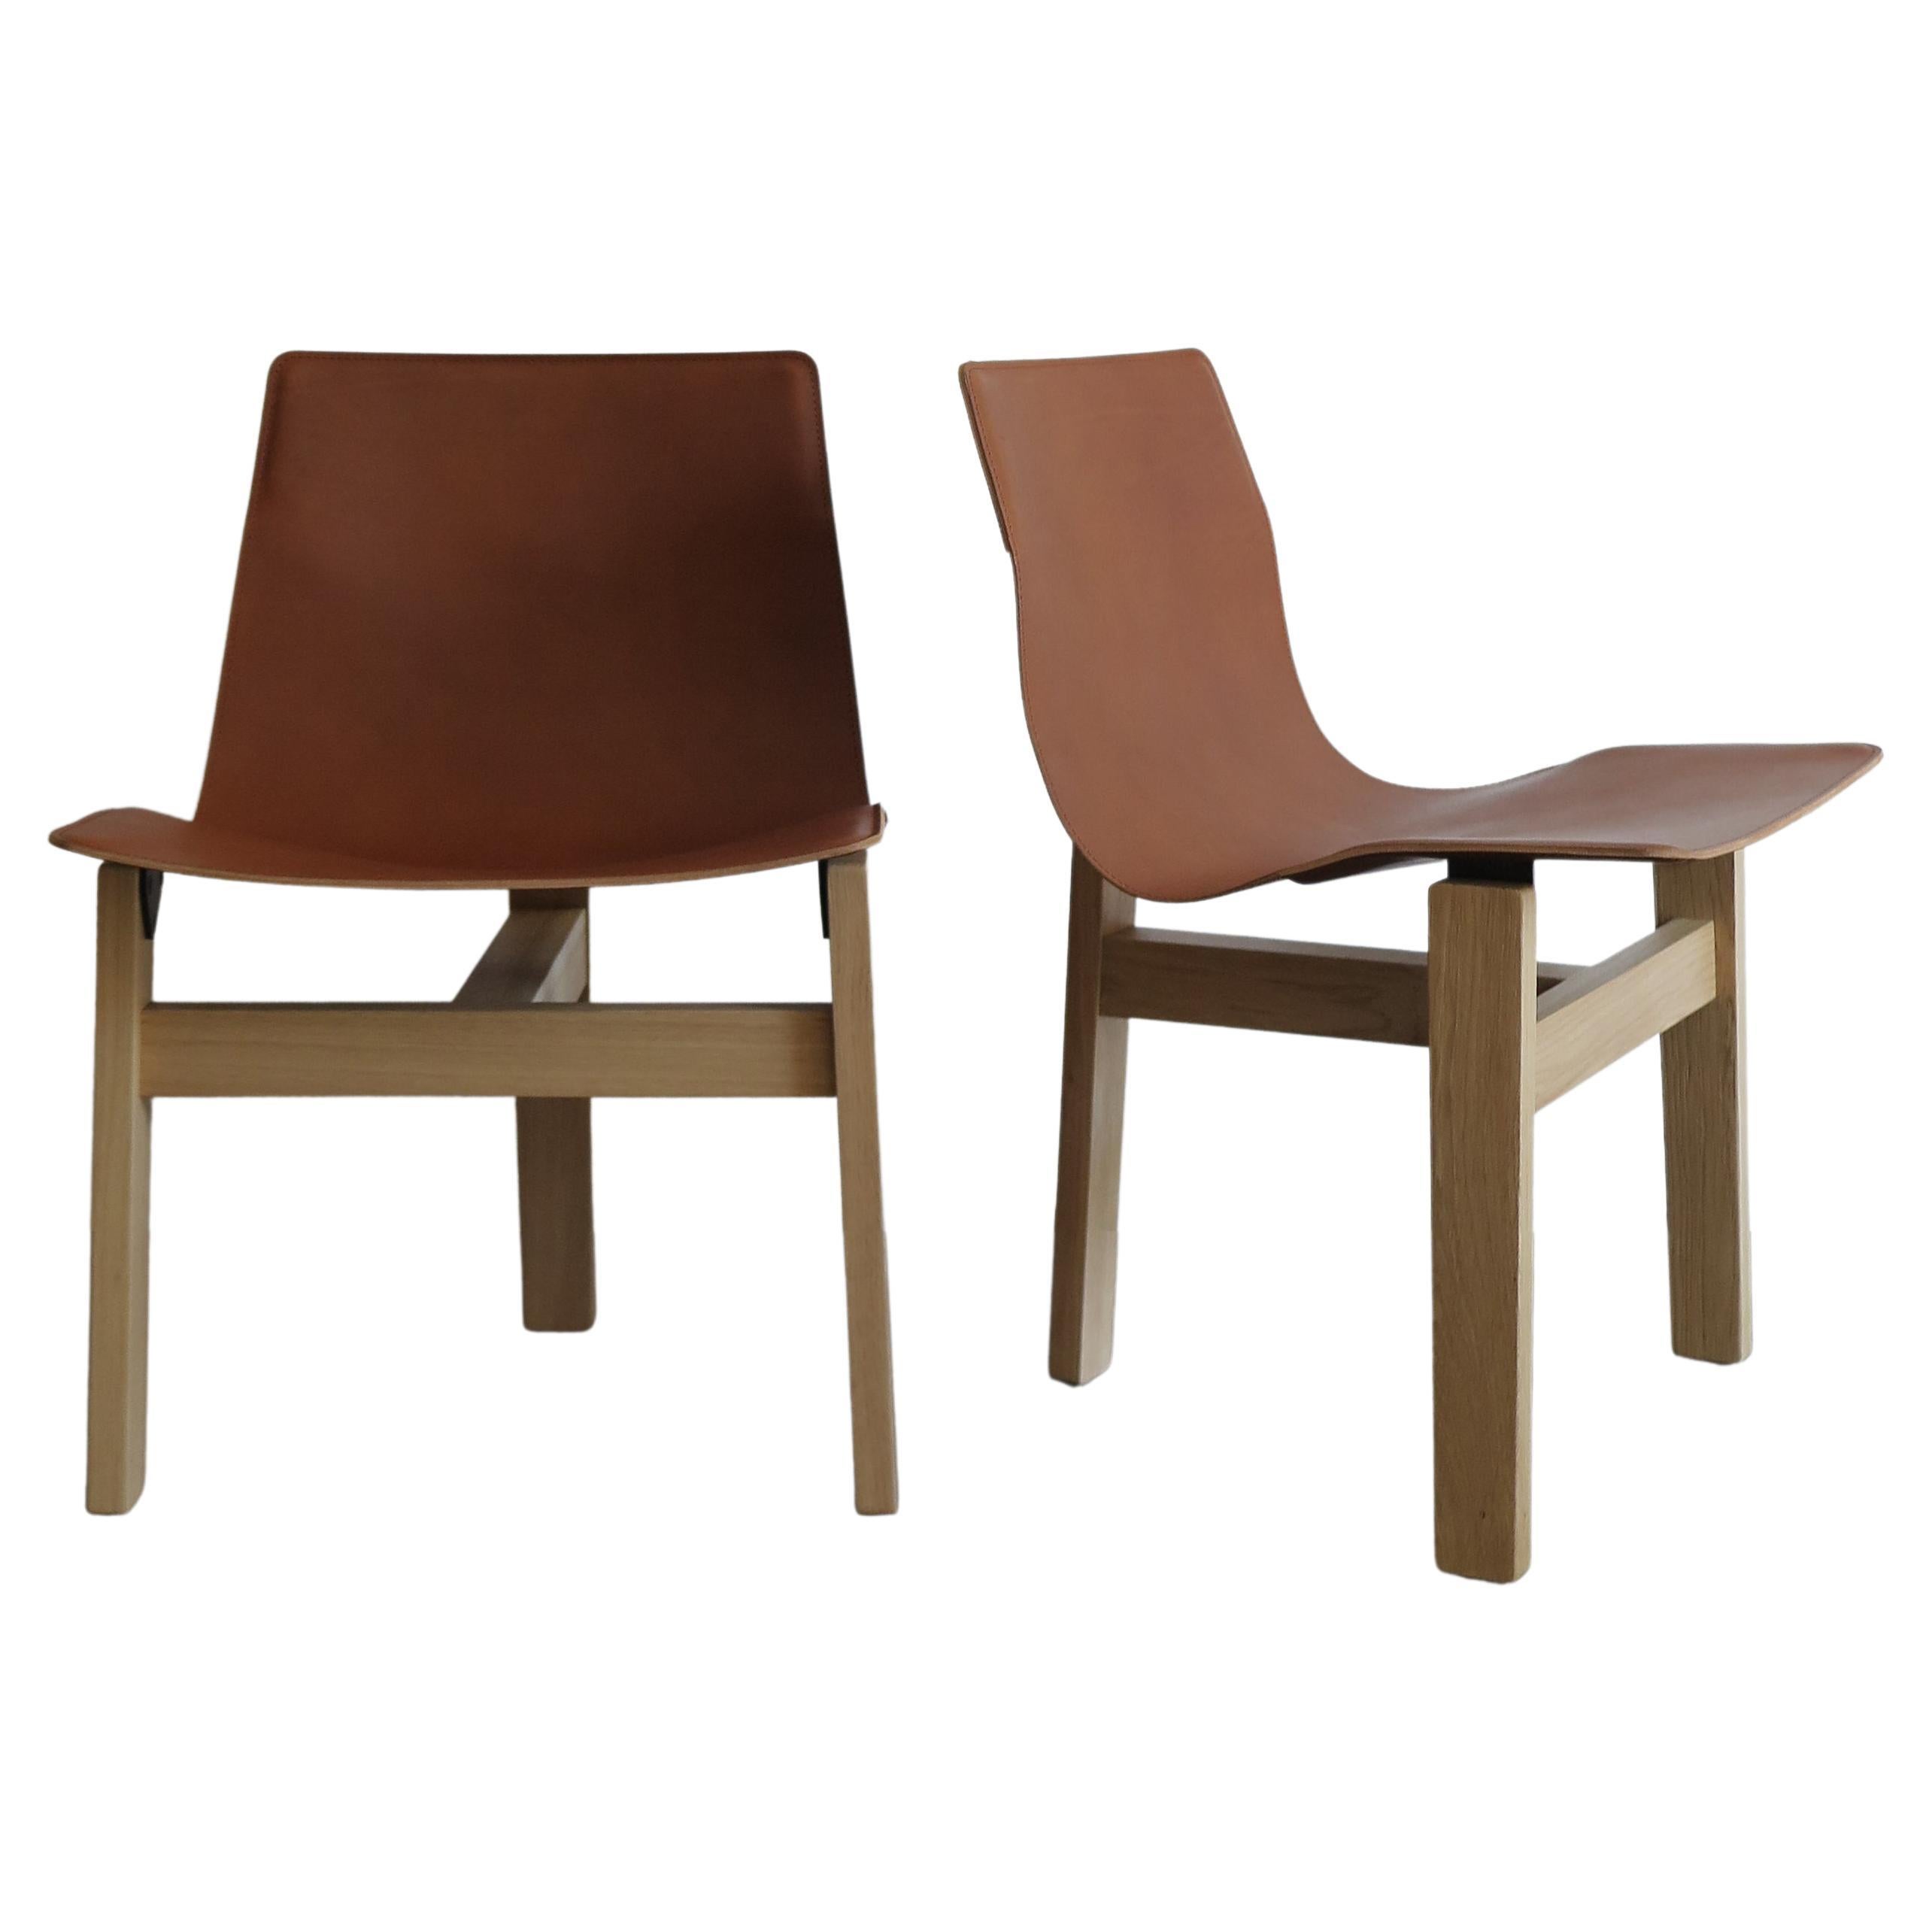 Angelo Mangiarotti Italian Leather and Wood Dining Chairs for Agapecasa